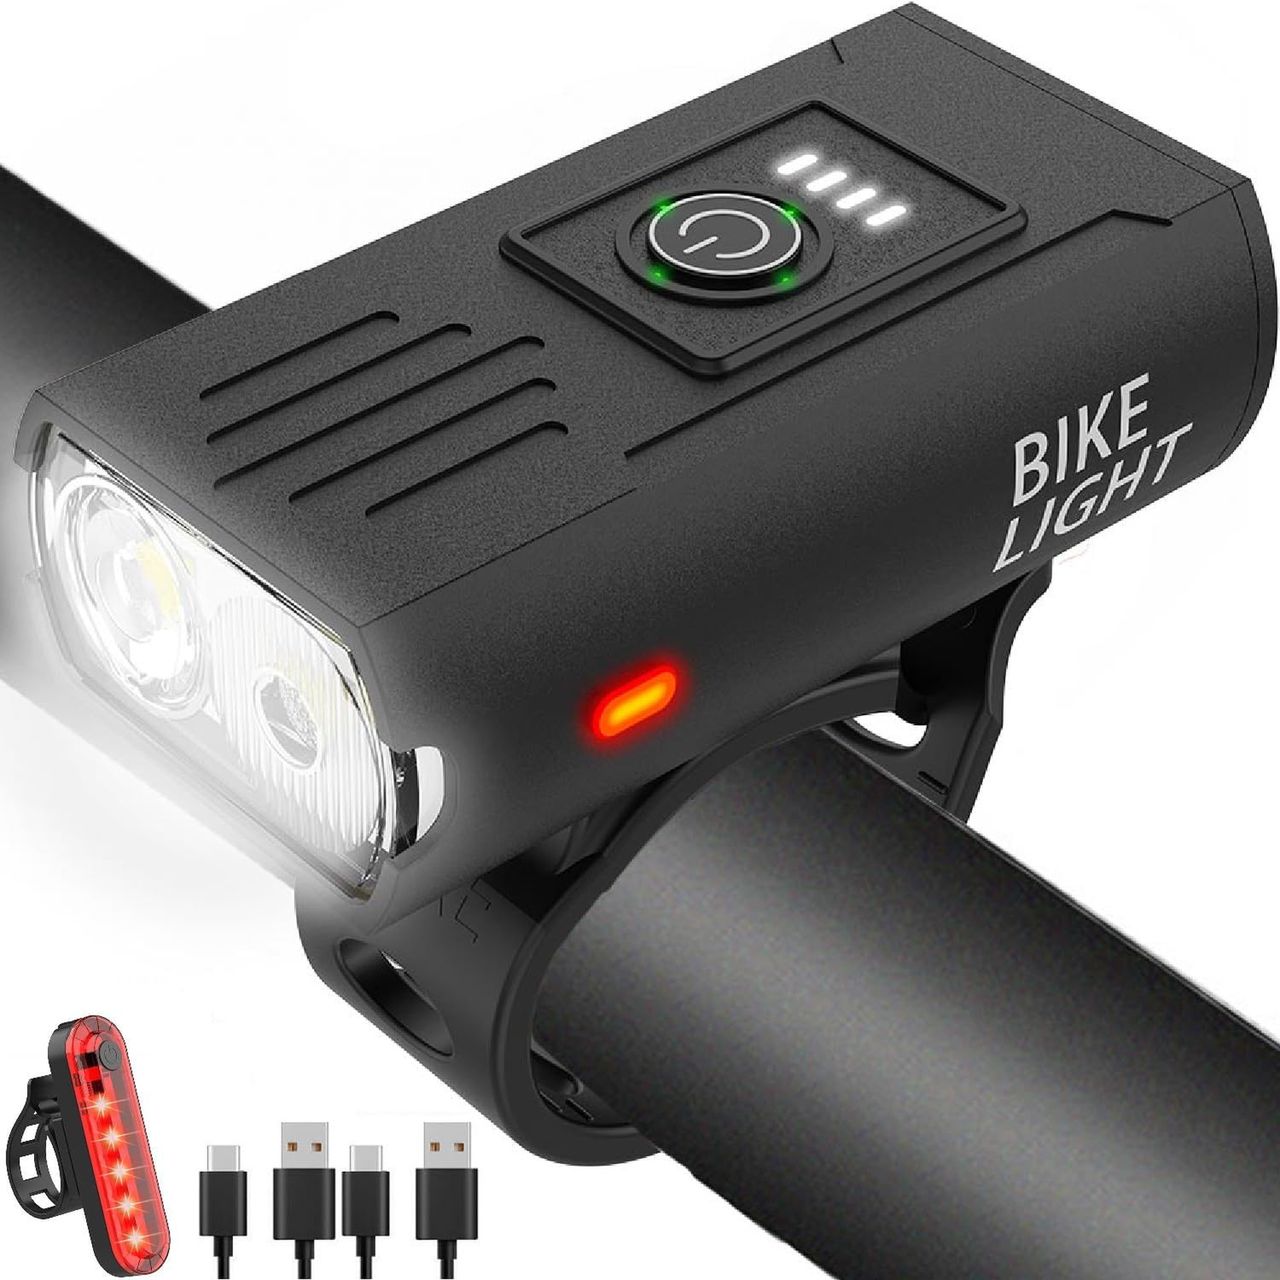 Victoper bicycle light